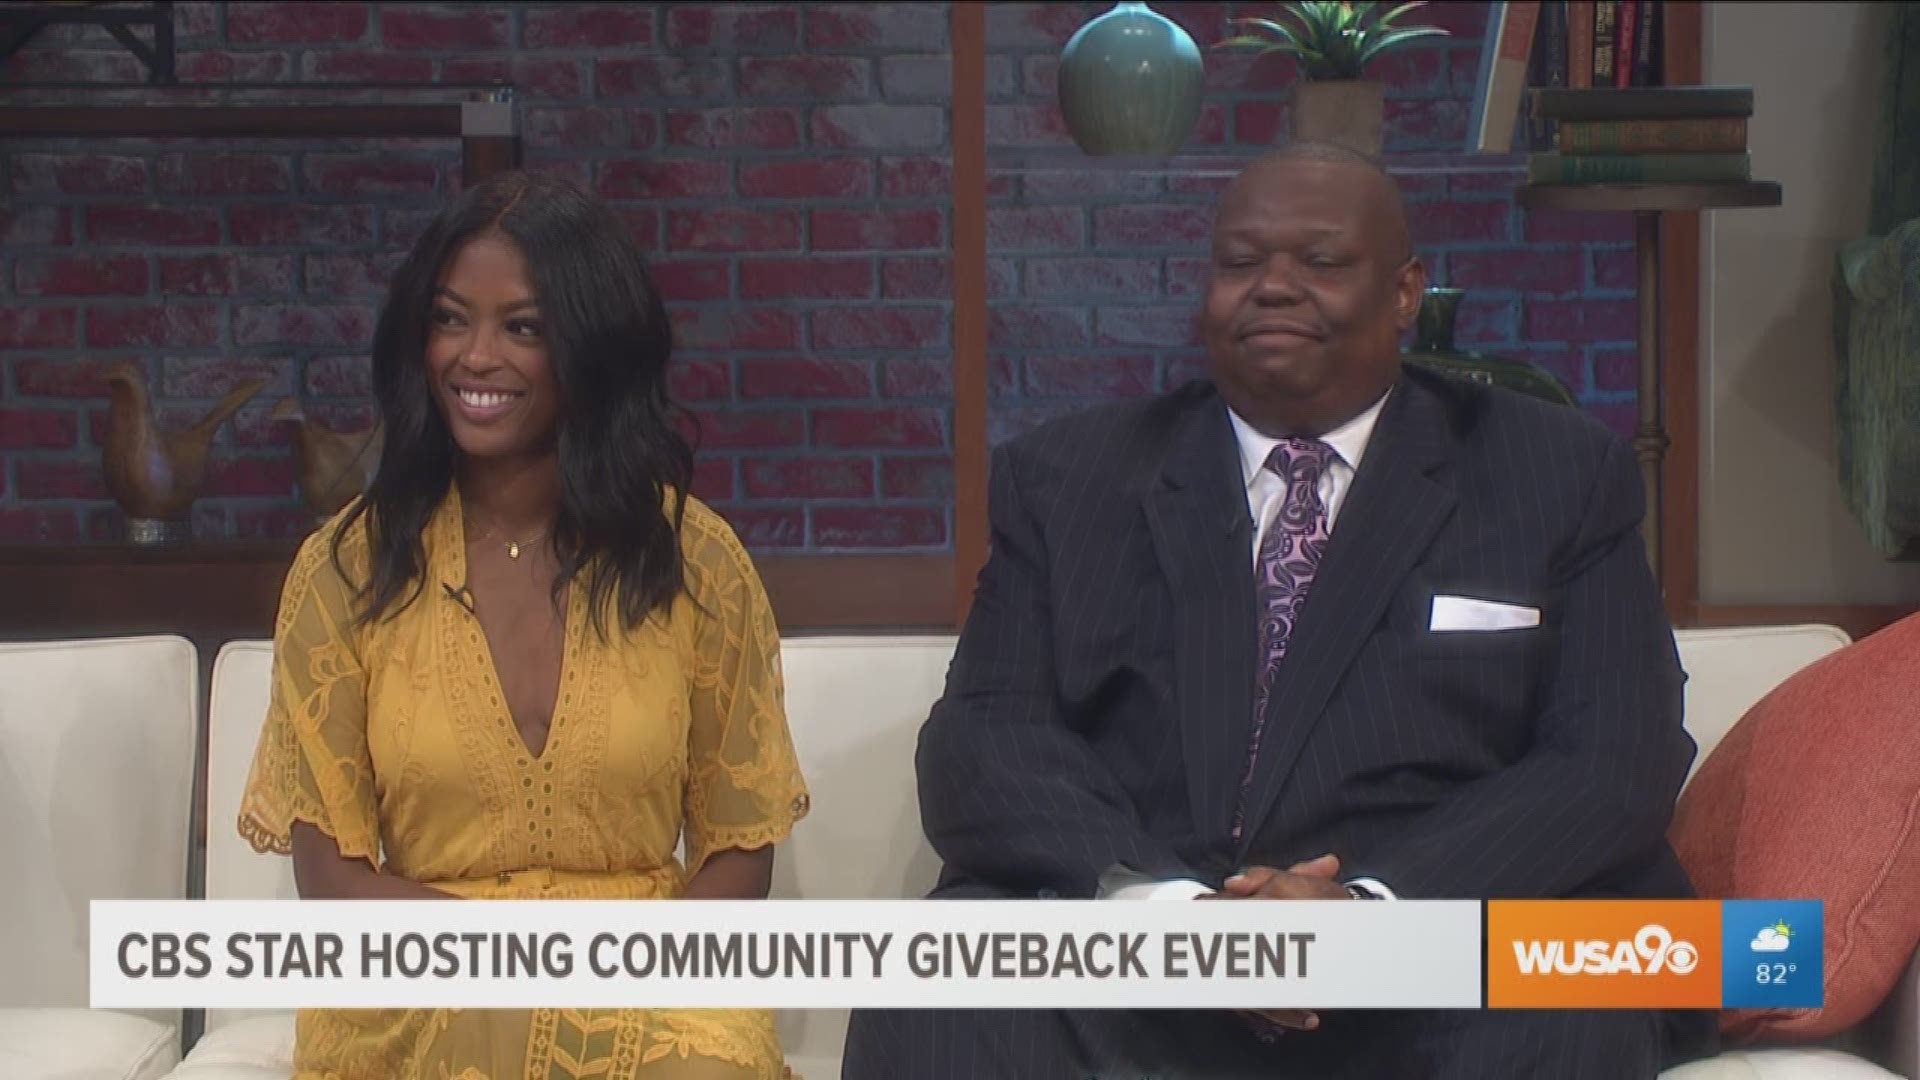 Paster Dededrick Rivers of Ward Memorial AME Church joining forces with CBS star Javicia Leslie to help kids get excited about heading back to school.  They are giving backpacks, supplies, and even fresh haircuts for young students.  The event is happening August 24th from noon to 4pm at Ward Memorial AME Church.